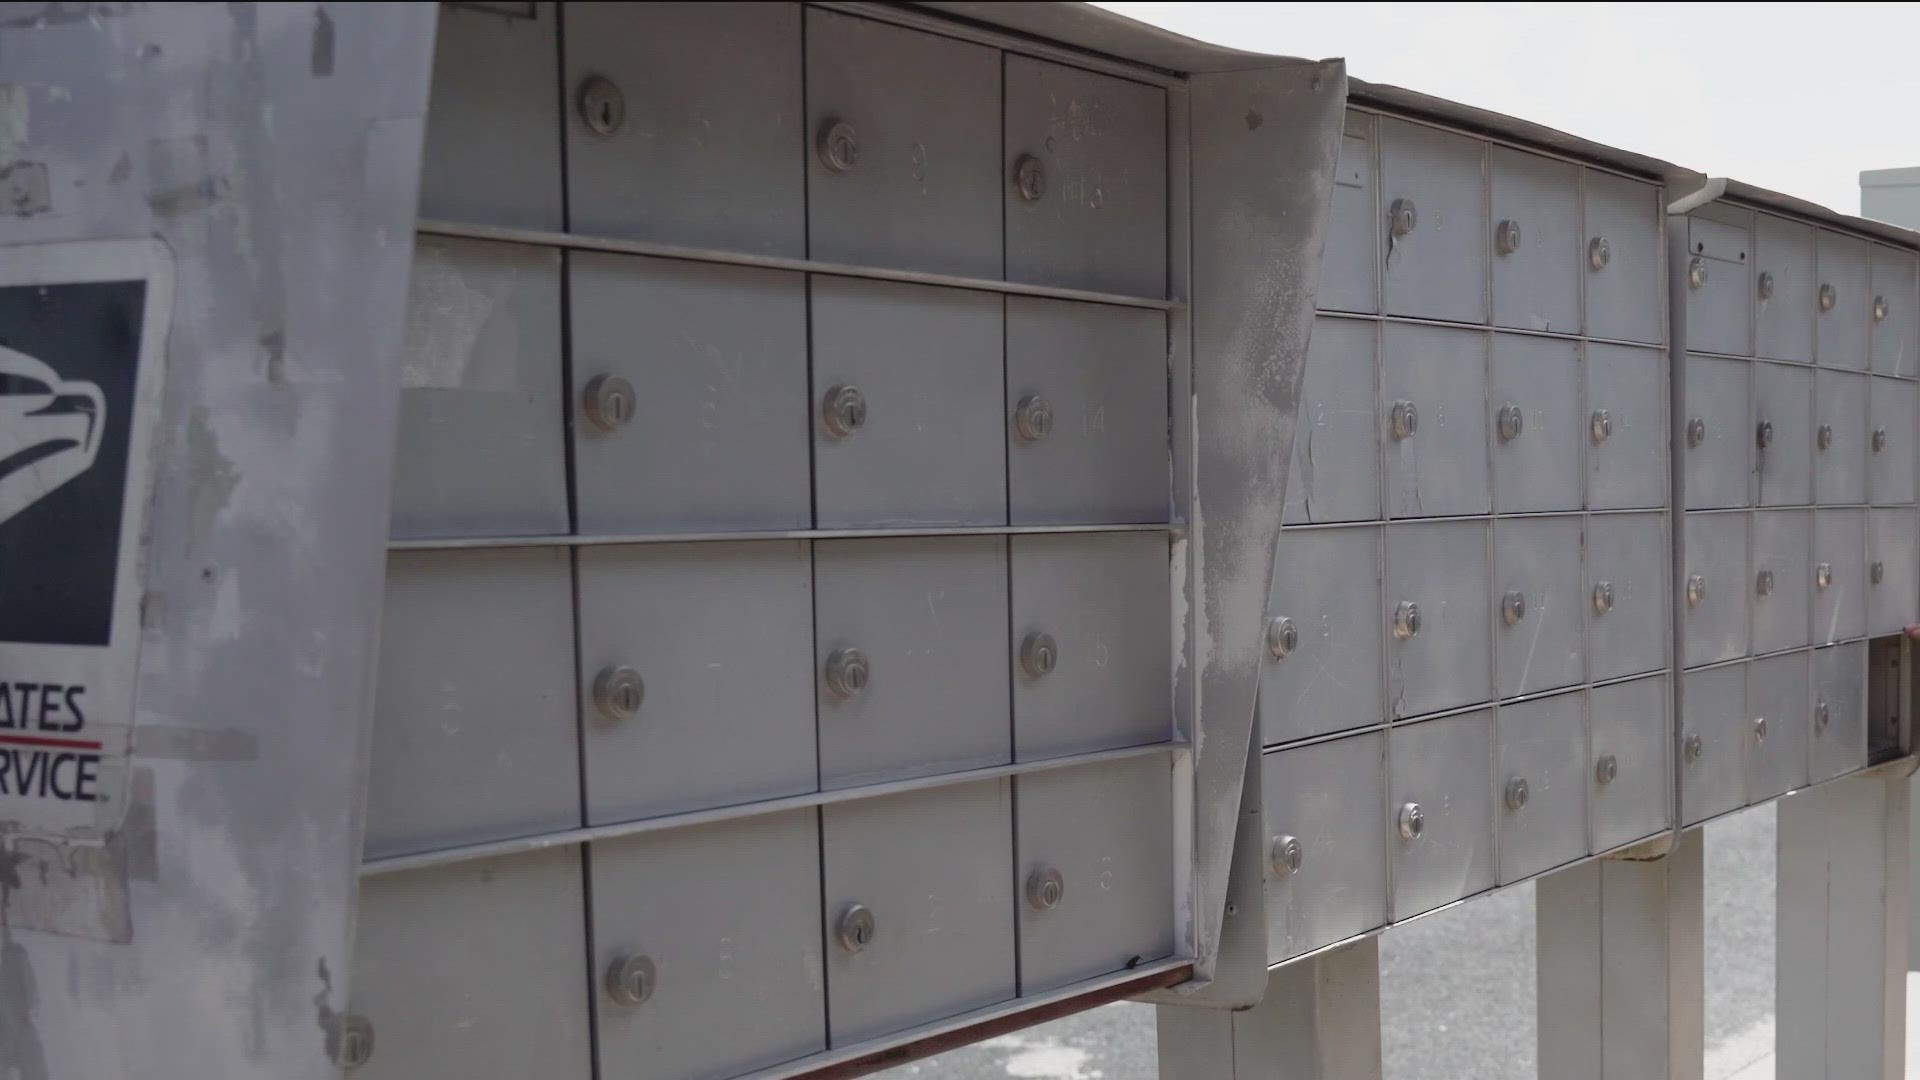 Mail theft puts your identity at risk. The KVUE Defenders found people guilty of the crime aren’t always prosecuted to the fullest extent of the law.